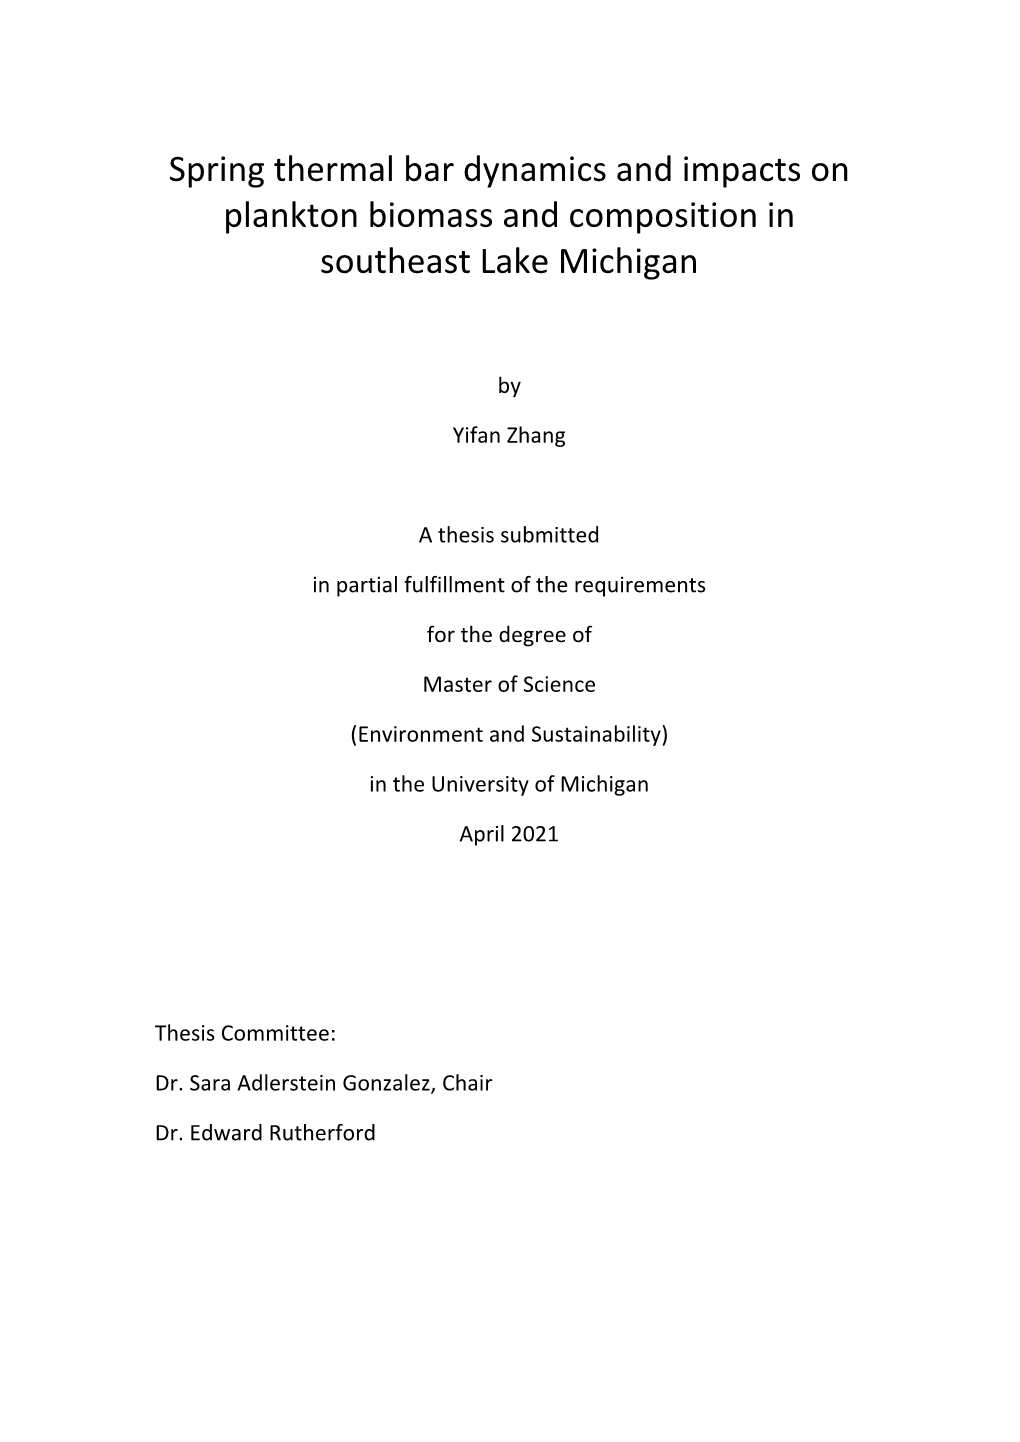 Spring Thermal Bar Dynamics and Impacts on Plankton Biomass and Composition in Southeast Lake Michigan